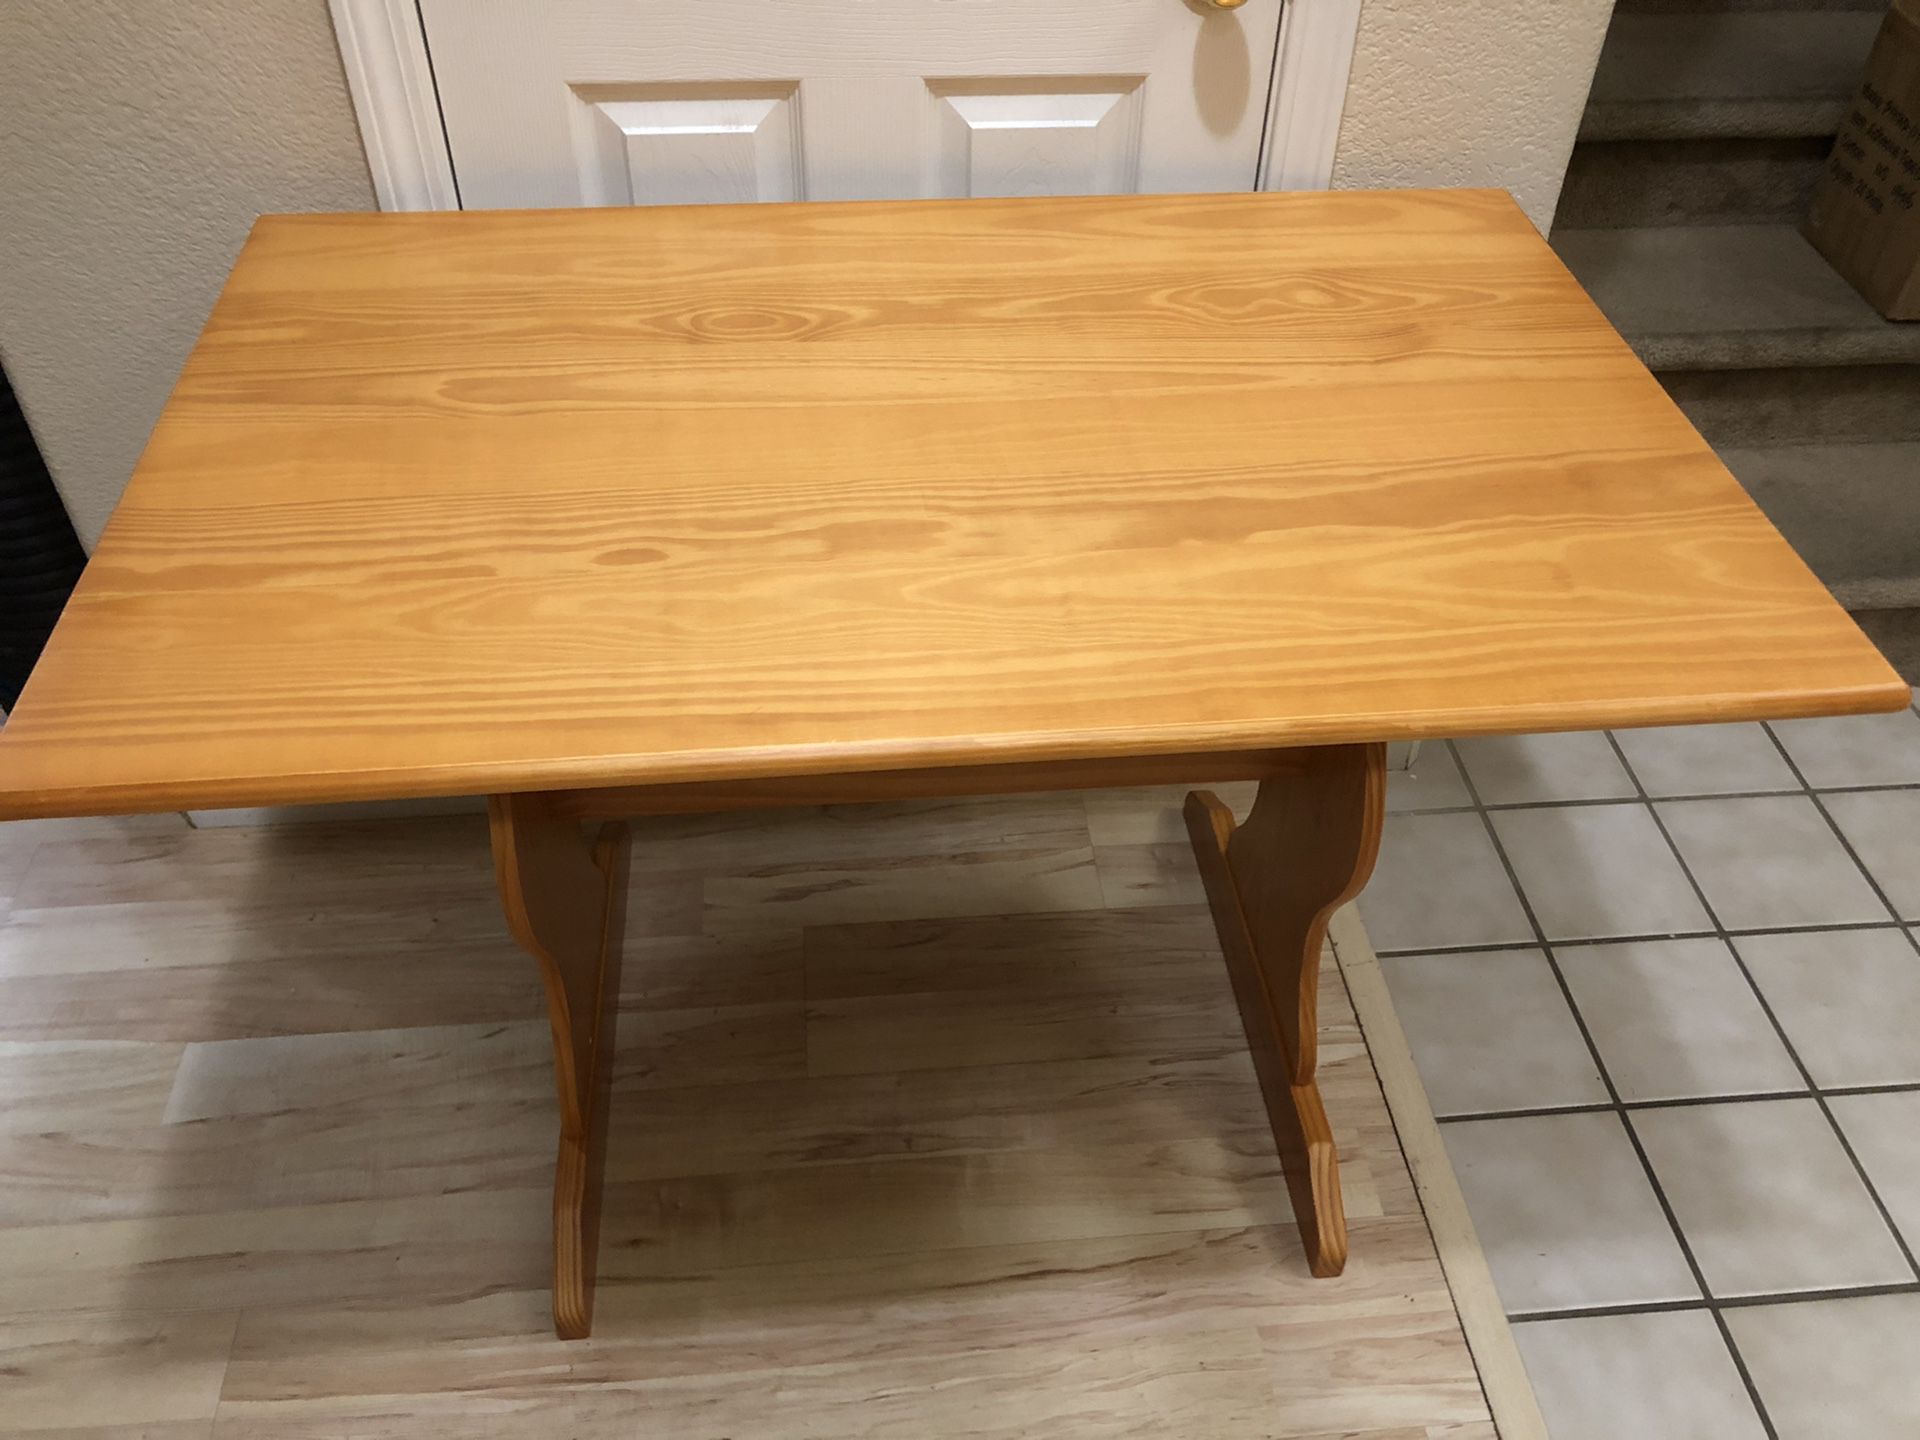 Brand New Small Solid Pine Wood Nook Kitchen Dining Table 43” x 28” x 30” T